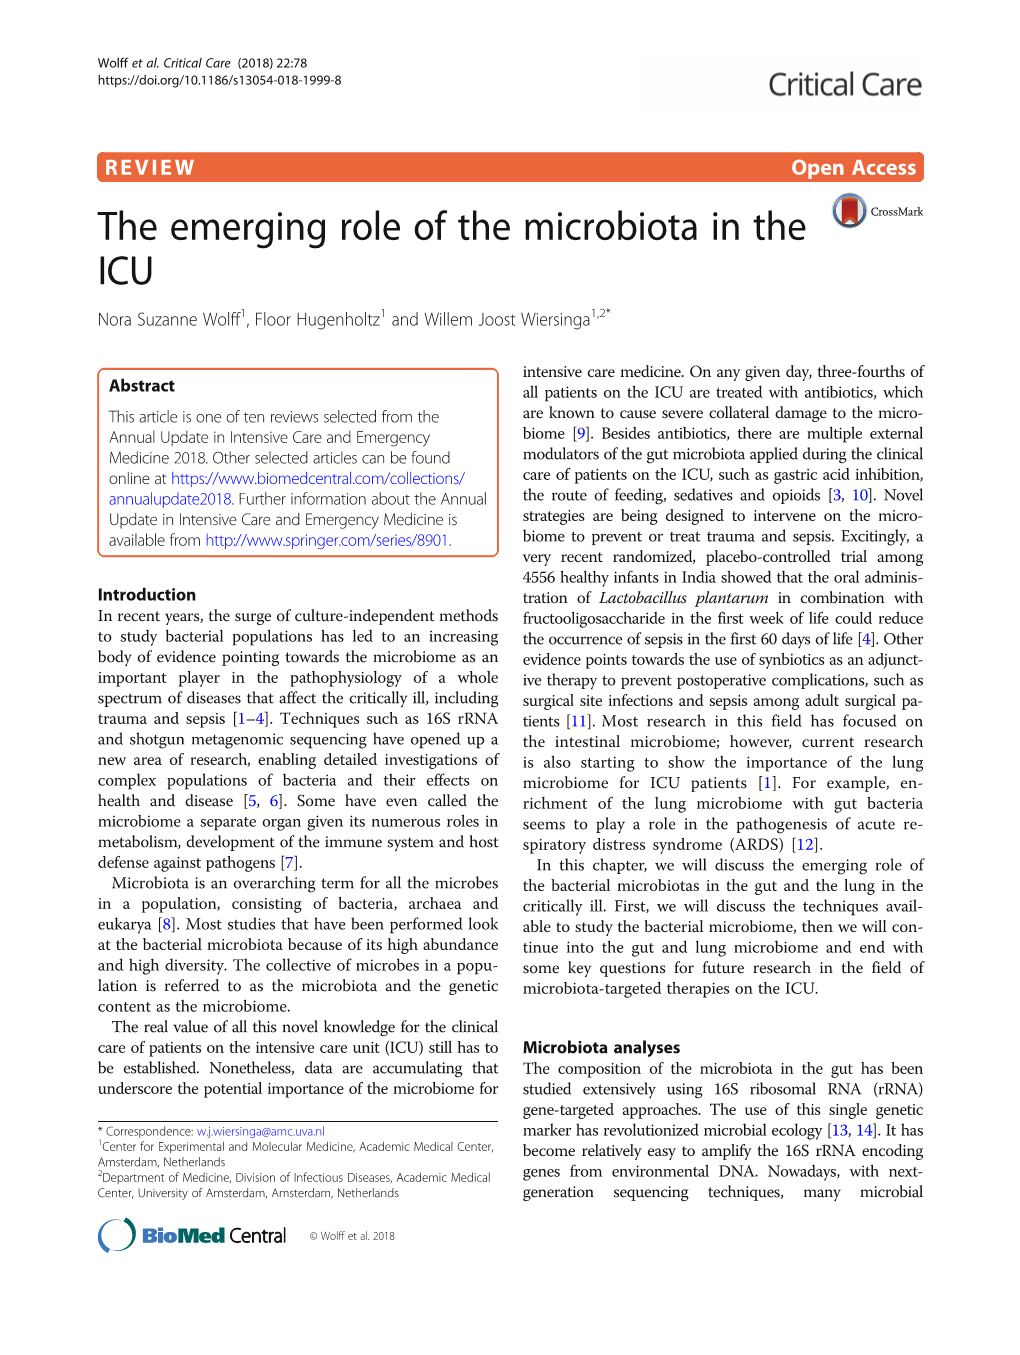 The Emerging Role of the Microbiota in the ICU Nora Suzanne Wolff1, Floor Hugenholtz1 and Willem Joost Wiersinga1,2*